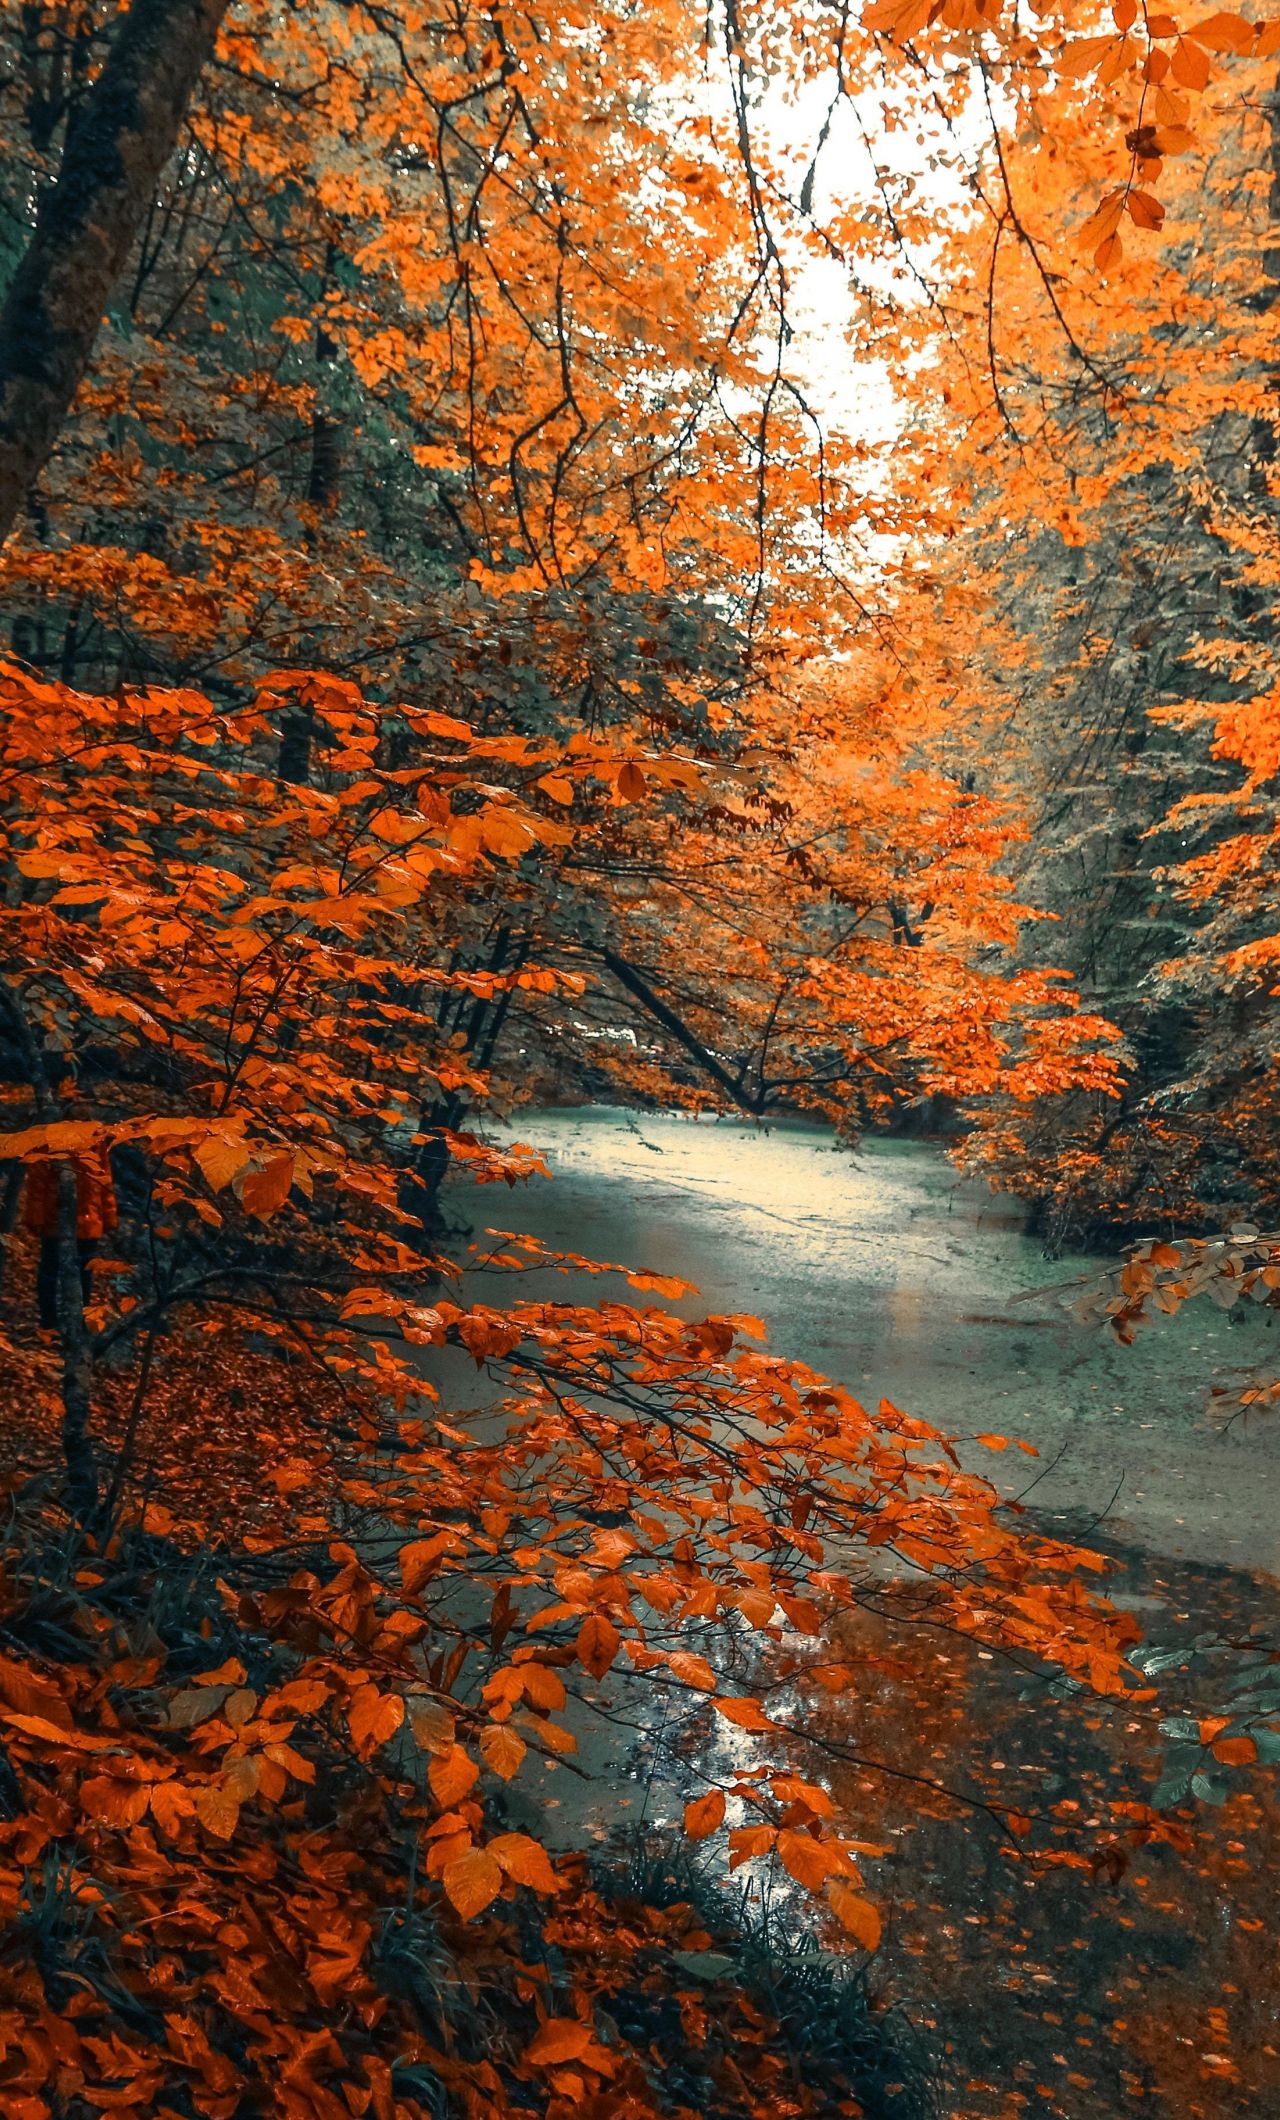 Download 1280x2120 wallpaper tree, forest, nature, orange branches, tree, autumn, iphone 6 plus, 1280x2120 HD image, background, 21127